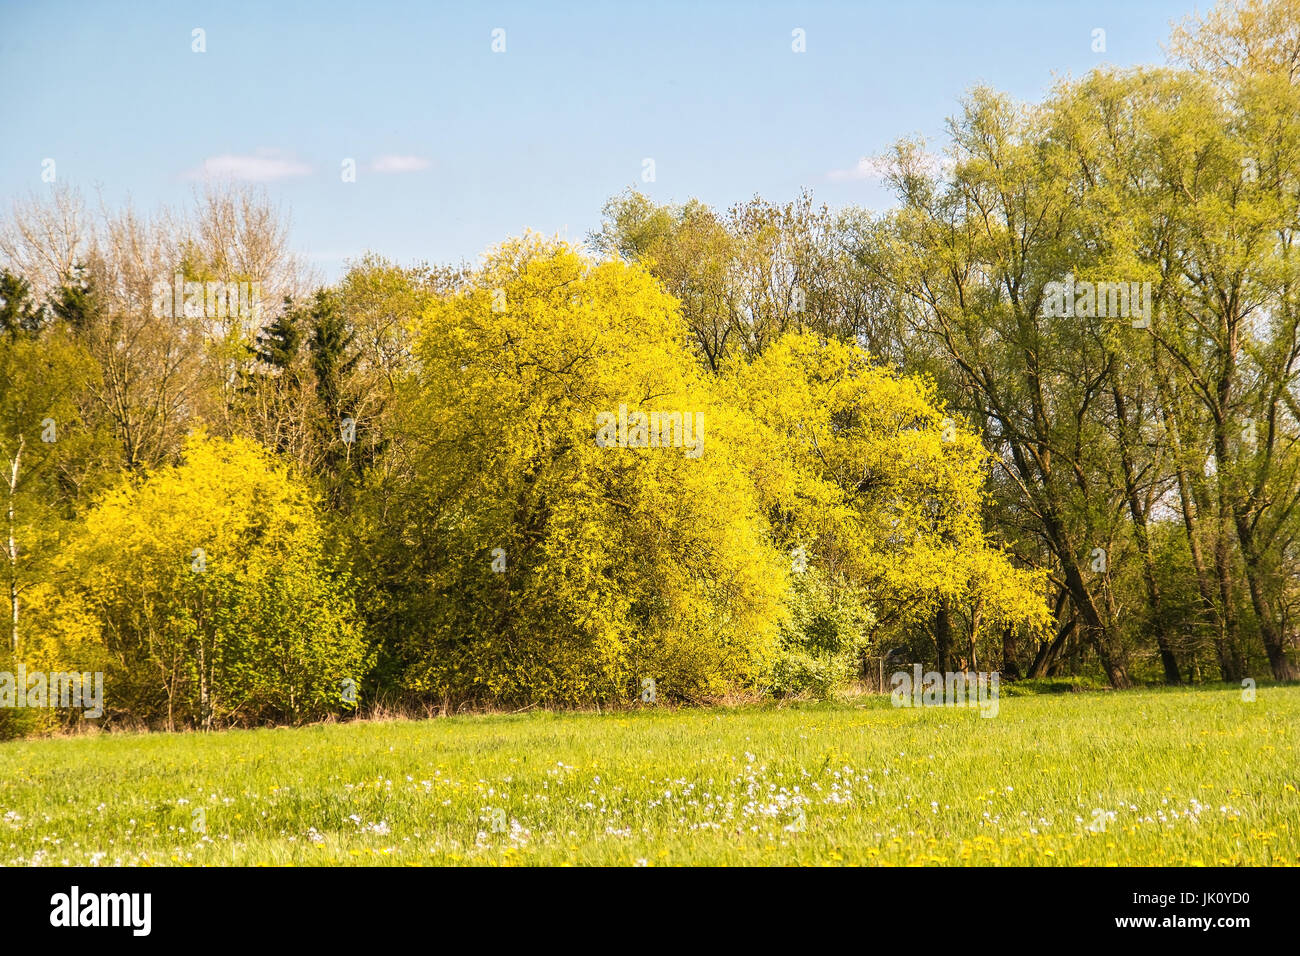 silver pastures (salix alba) in full May blossom in protected auwiese, existed with seldom become chess board flowers, silberweiden (salix alba) in vo Stock Photo